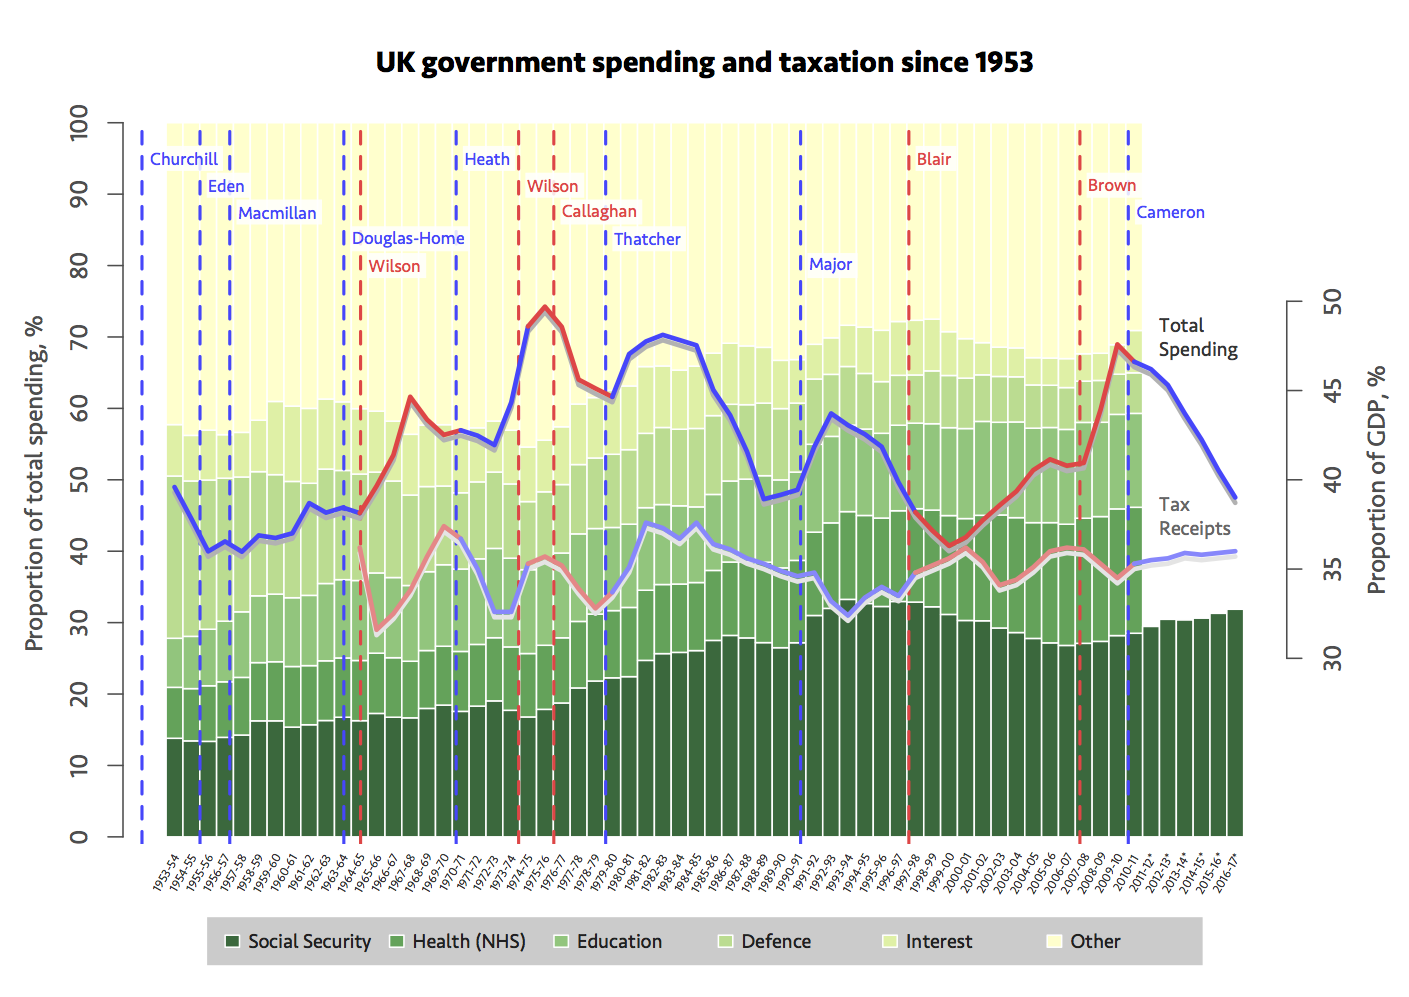 Chart of UK government spending and taxation since 1953